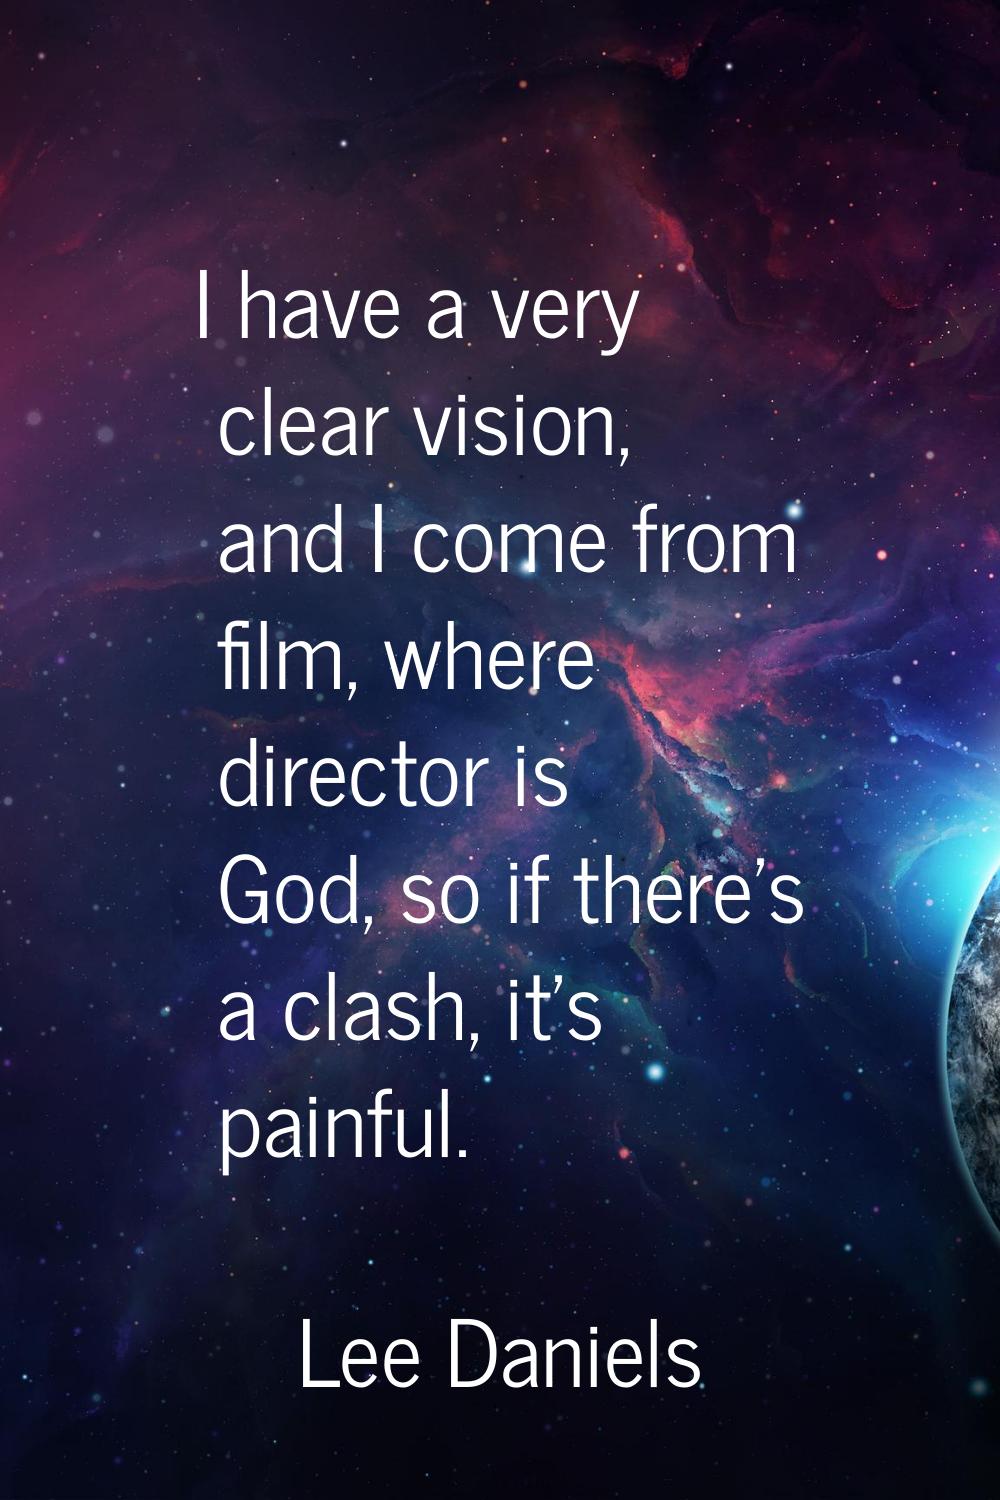 I have a very clear vision, and I come from film, where director is God, so if there's a clash, it'